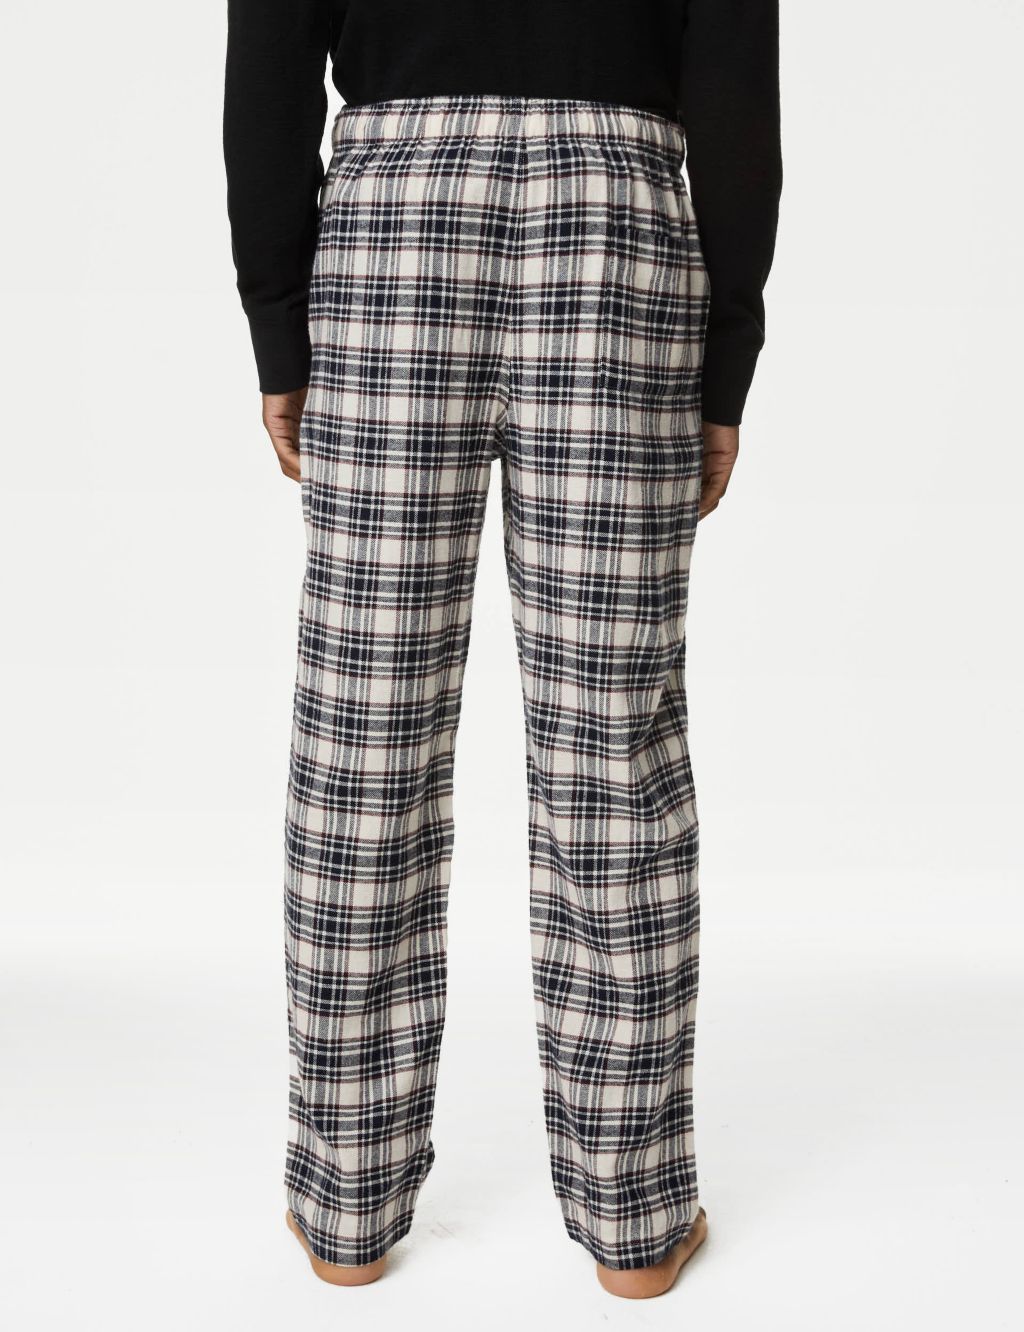 Brushed Cotton Checked Loungewear Bottoms image 5